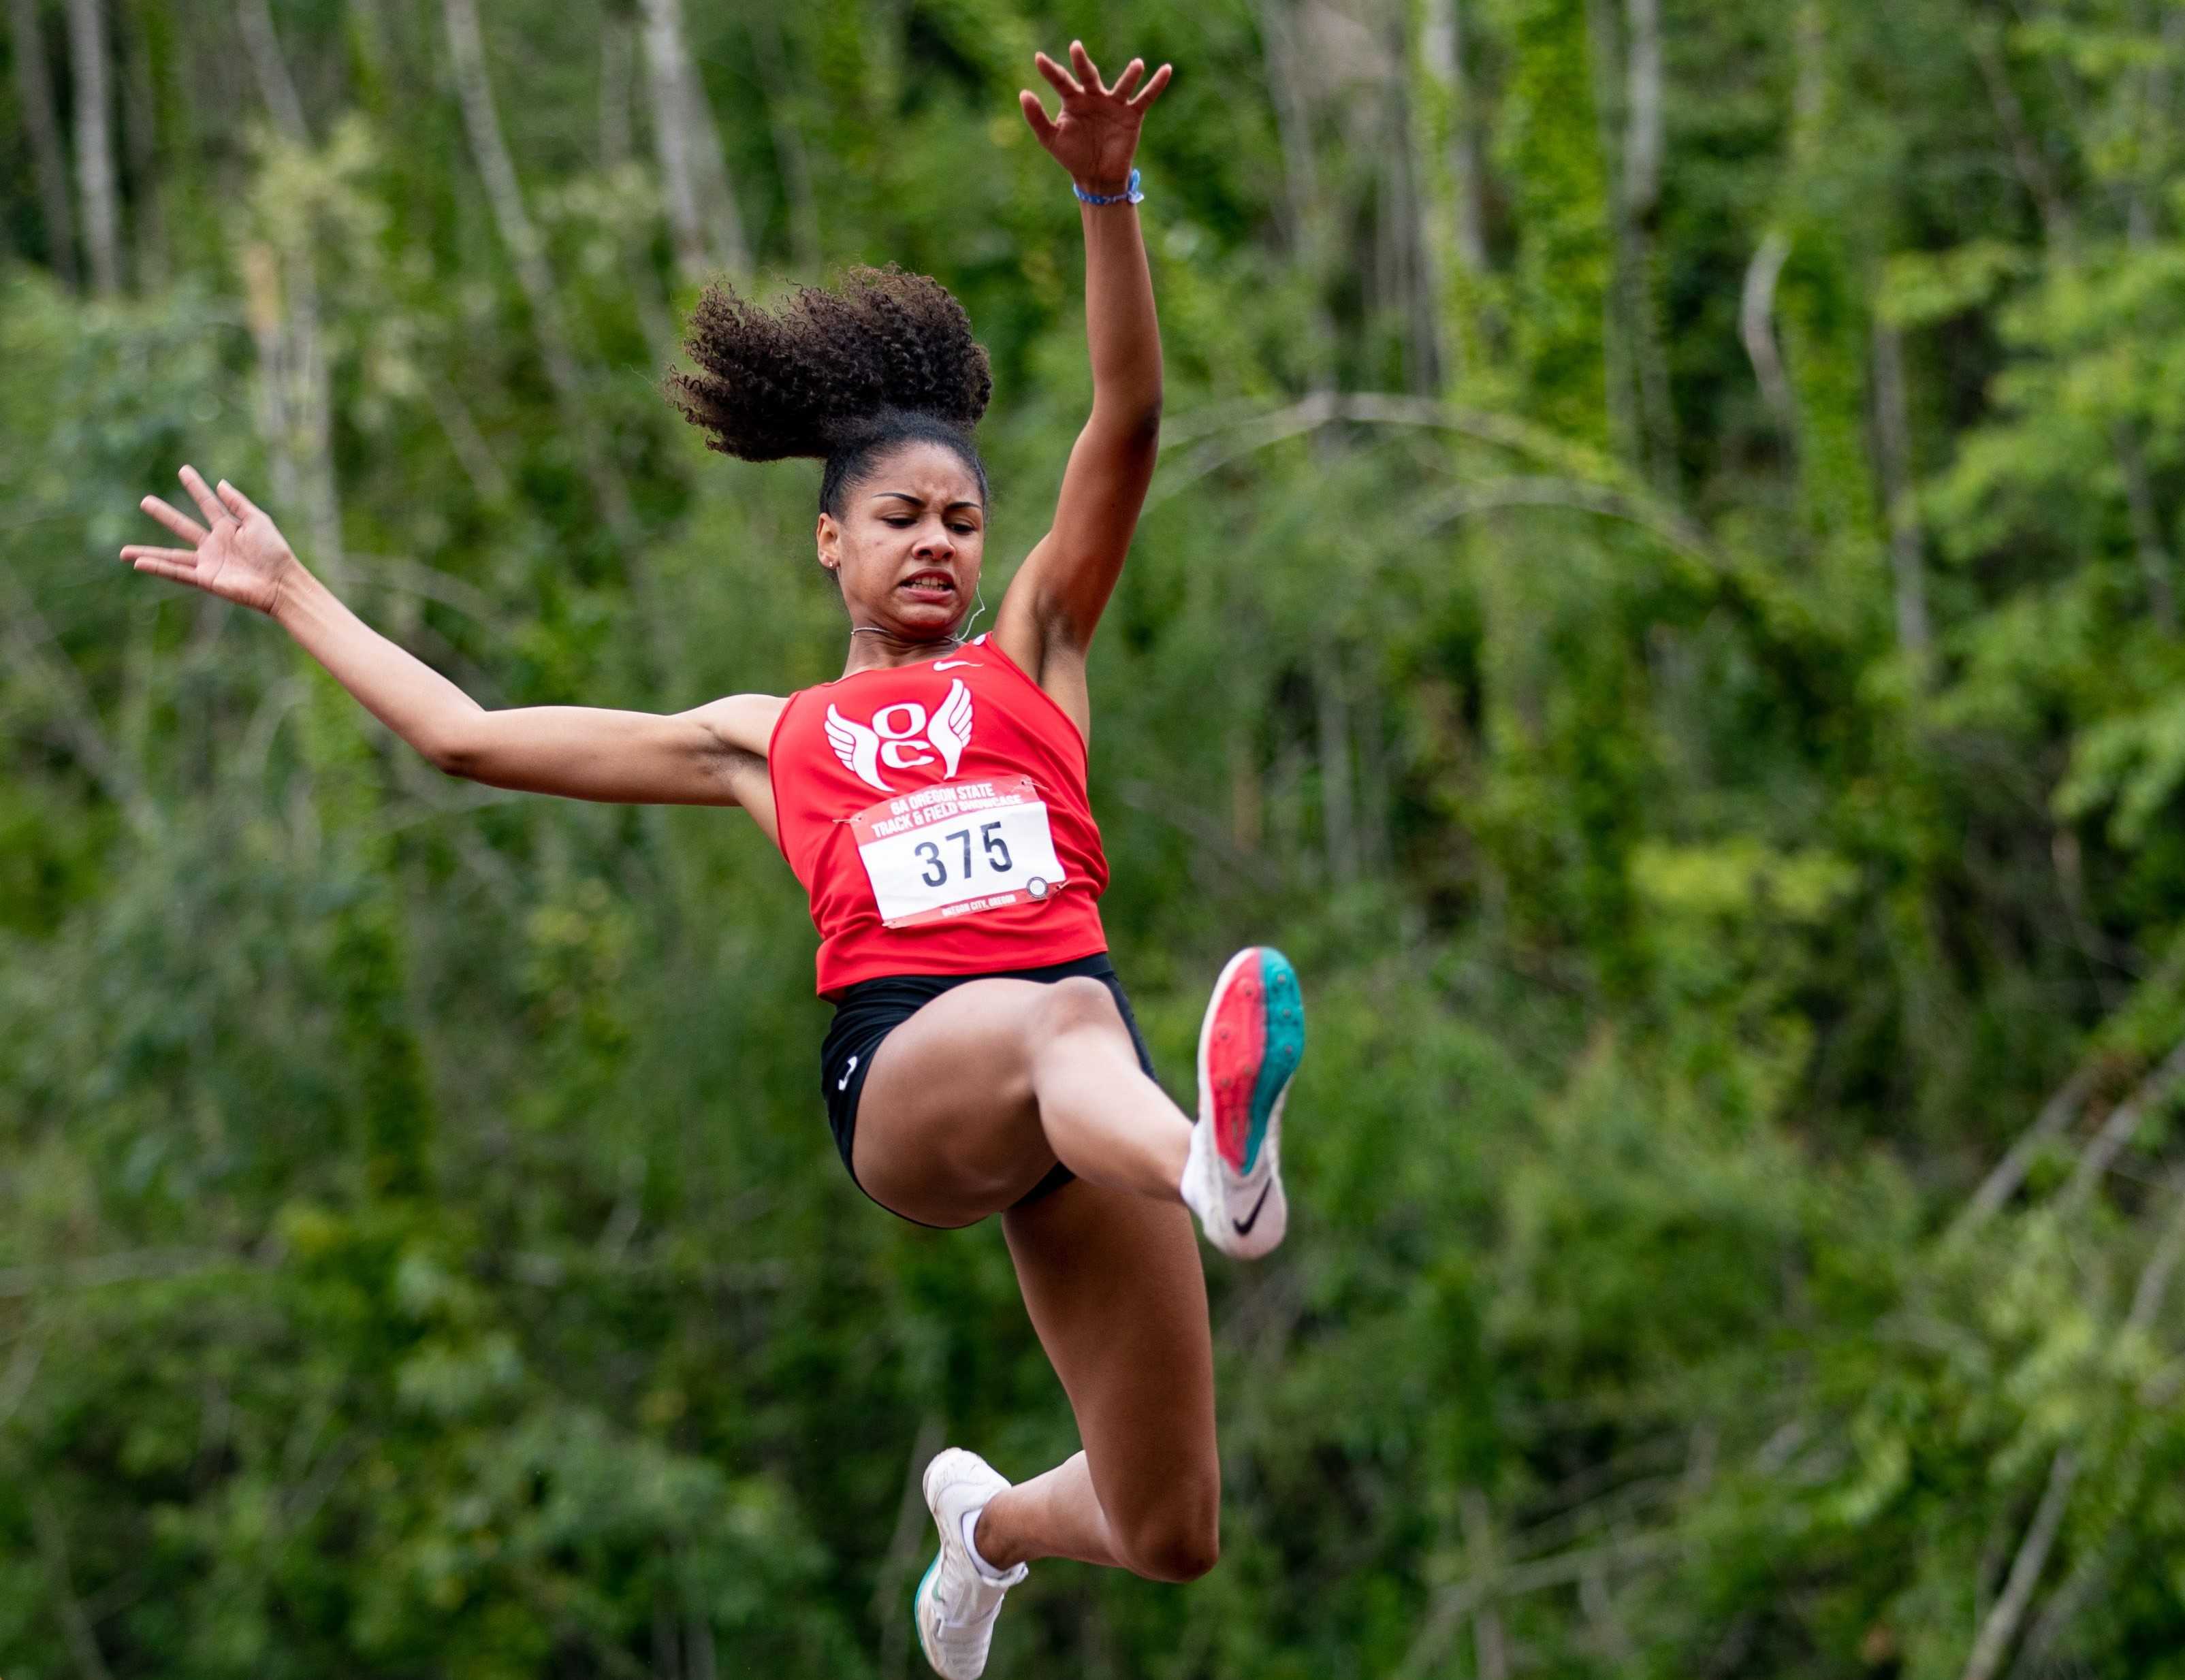 Oregon City junior Sophia Beckmon is looking to build on her state record in the long jump this season. (Photo by Howard Lao)